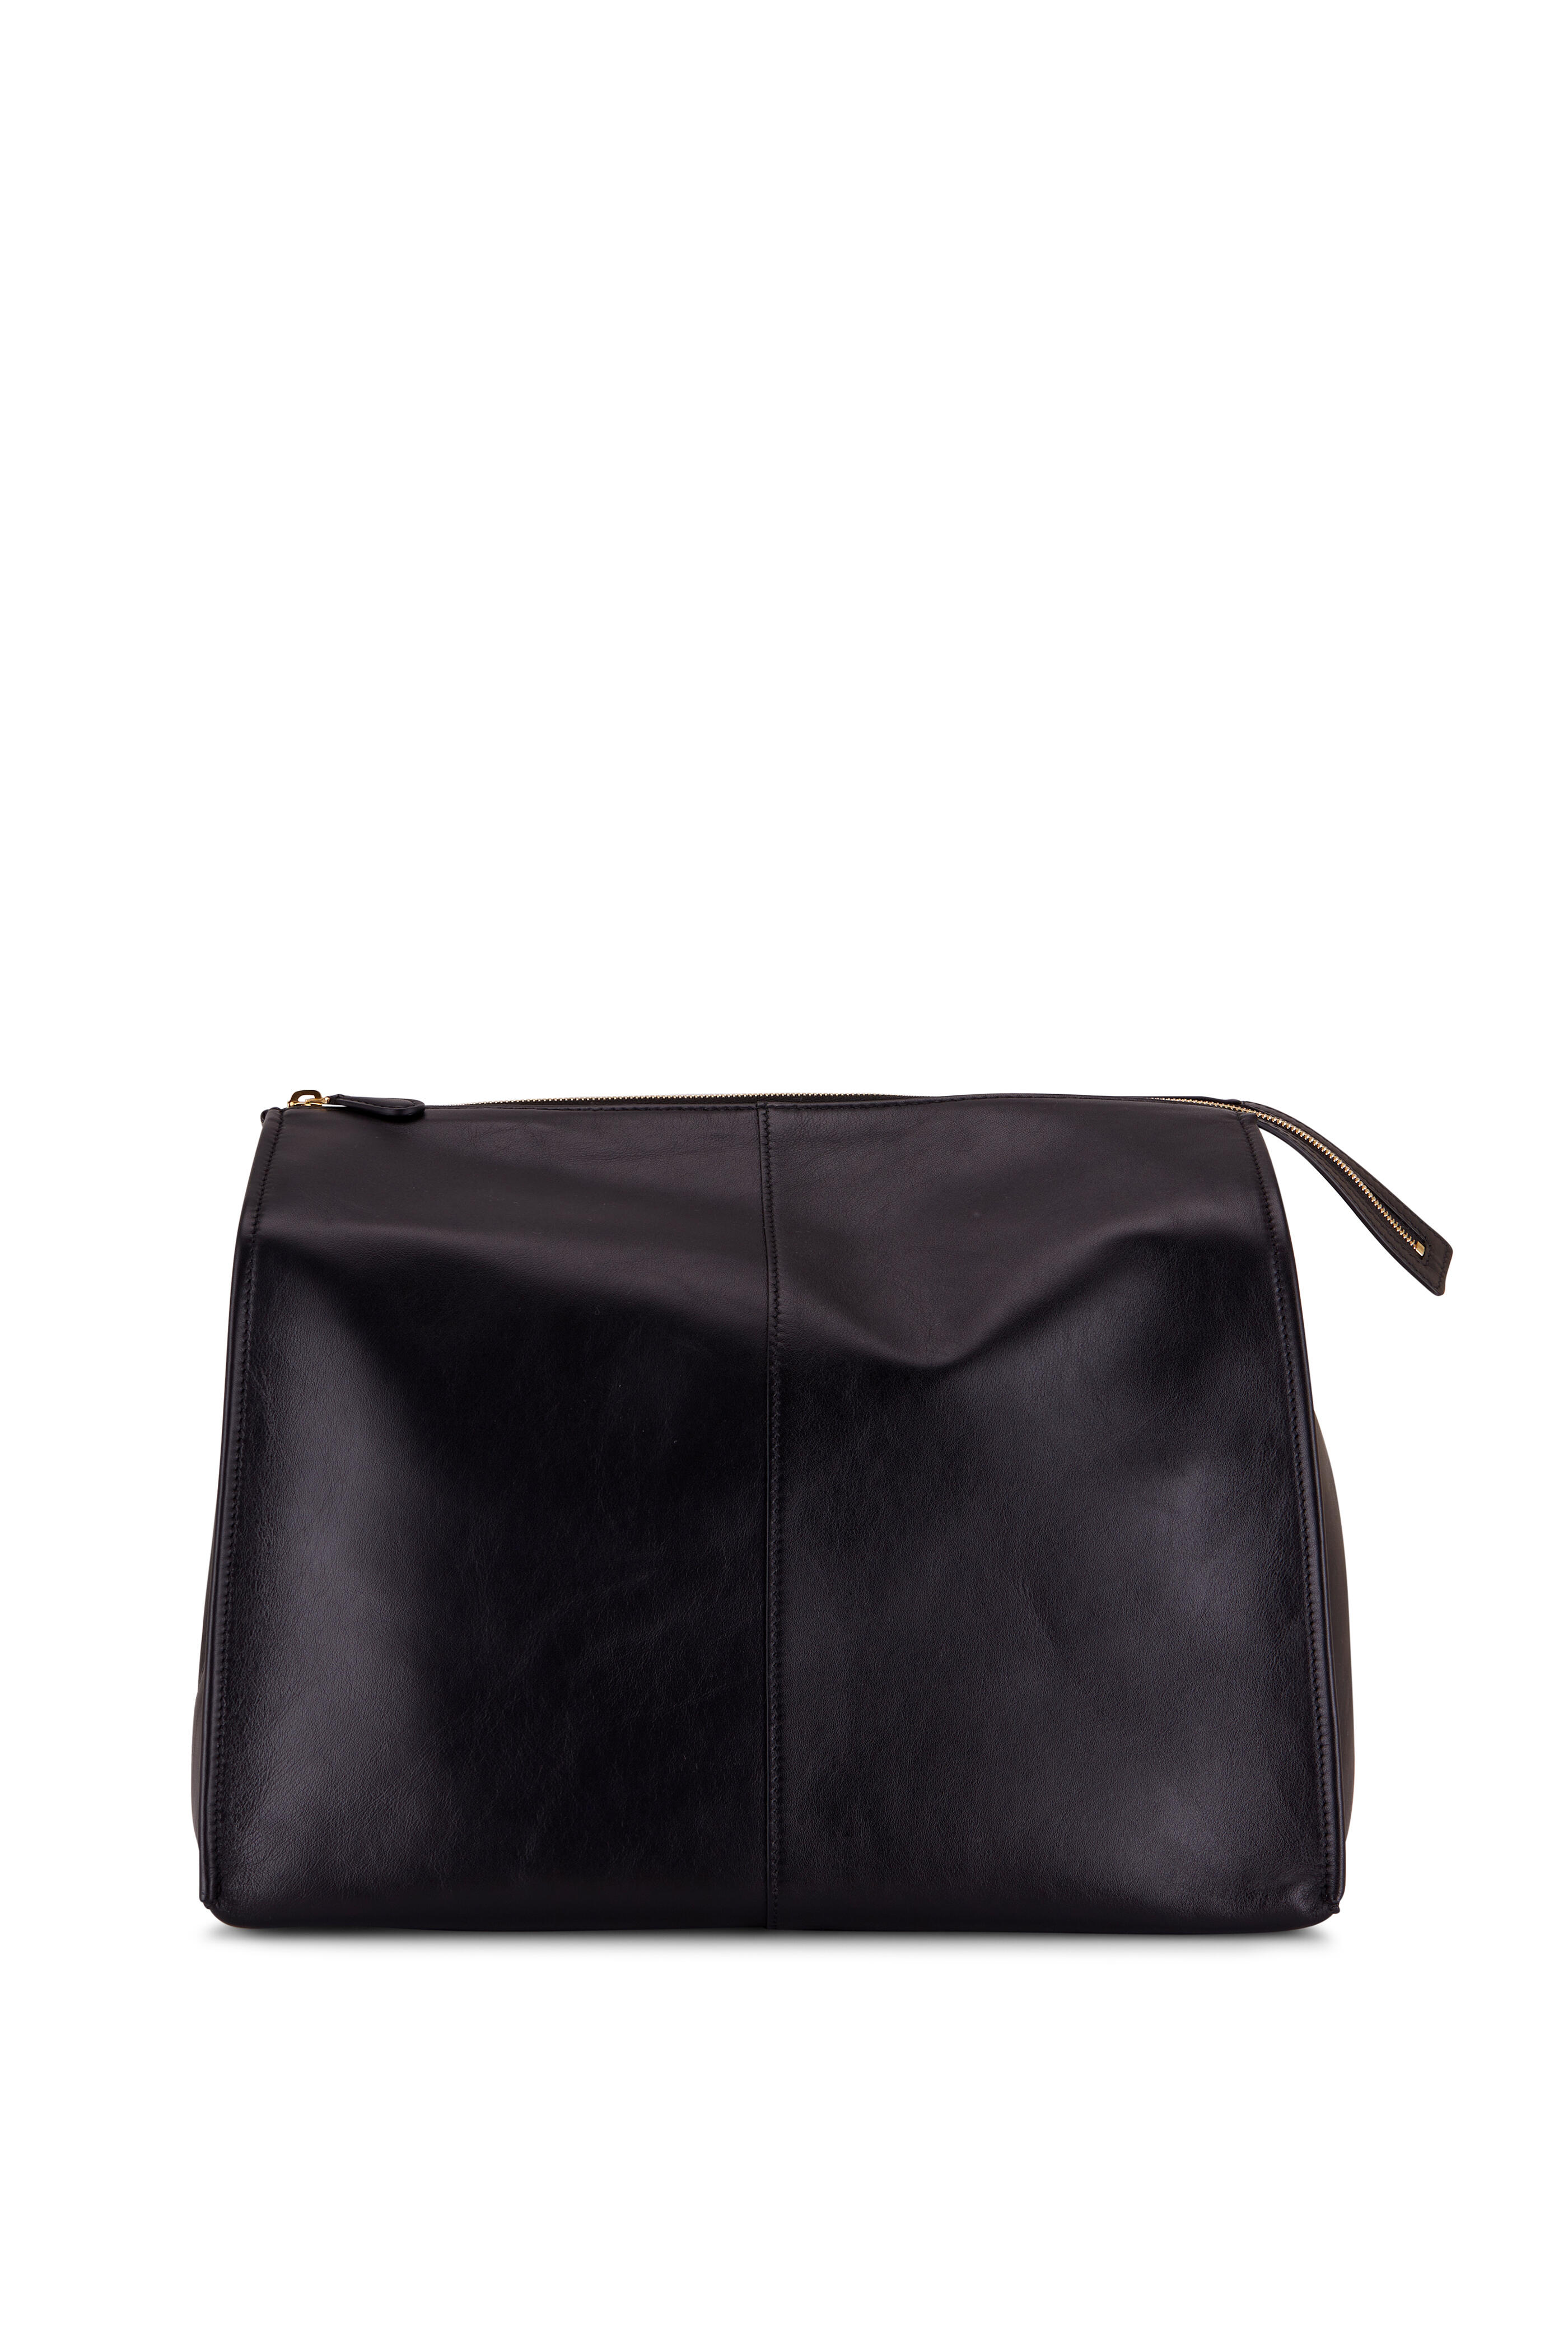 The Row - Aspen Black Leather Clutch | Mitchell Stores